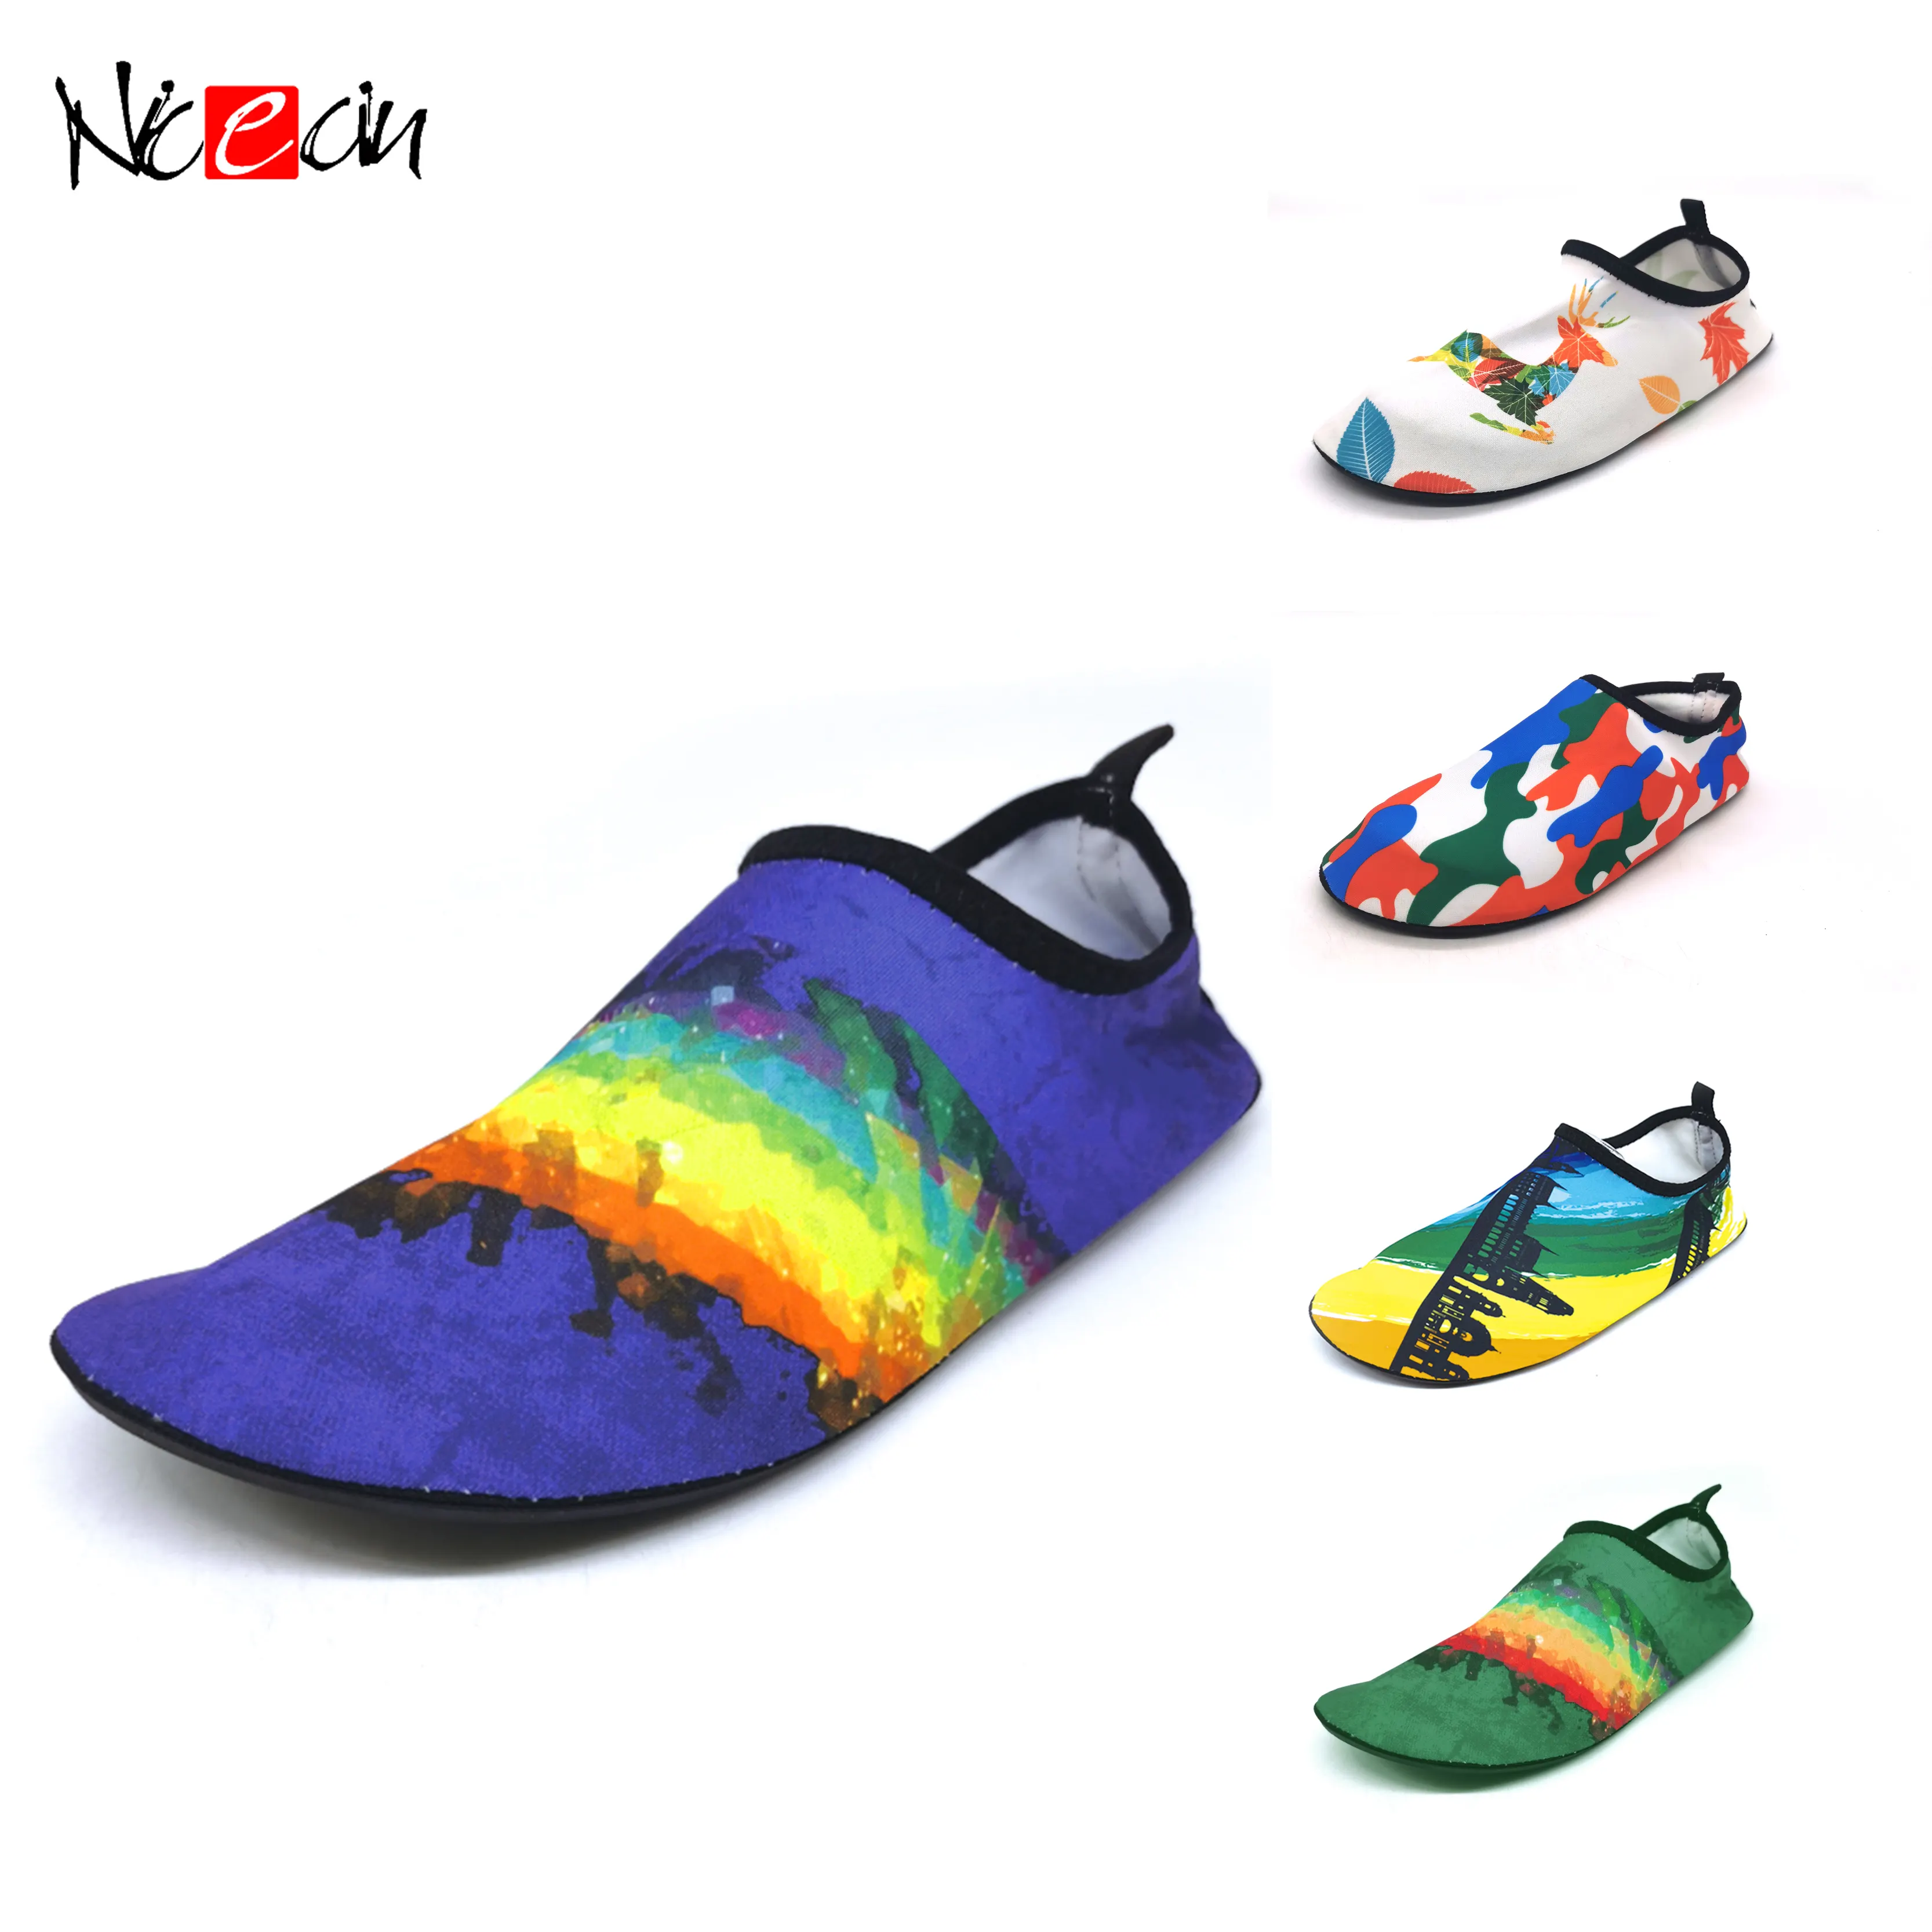 Nicecin New arrival hot selling Quick Dry Beach Sports Aqua Shoes and different printing Surfing Walking swimming shoes